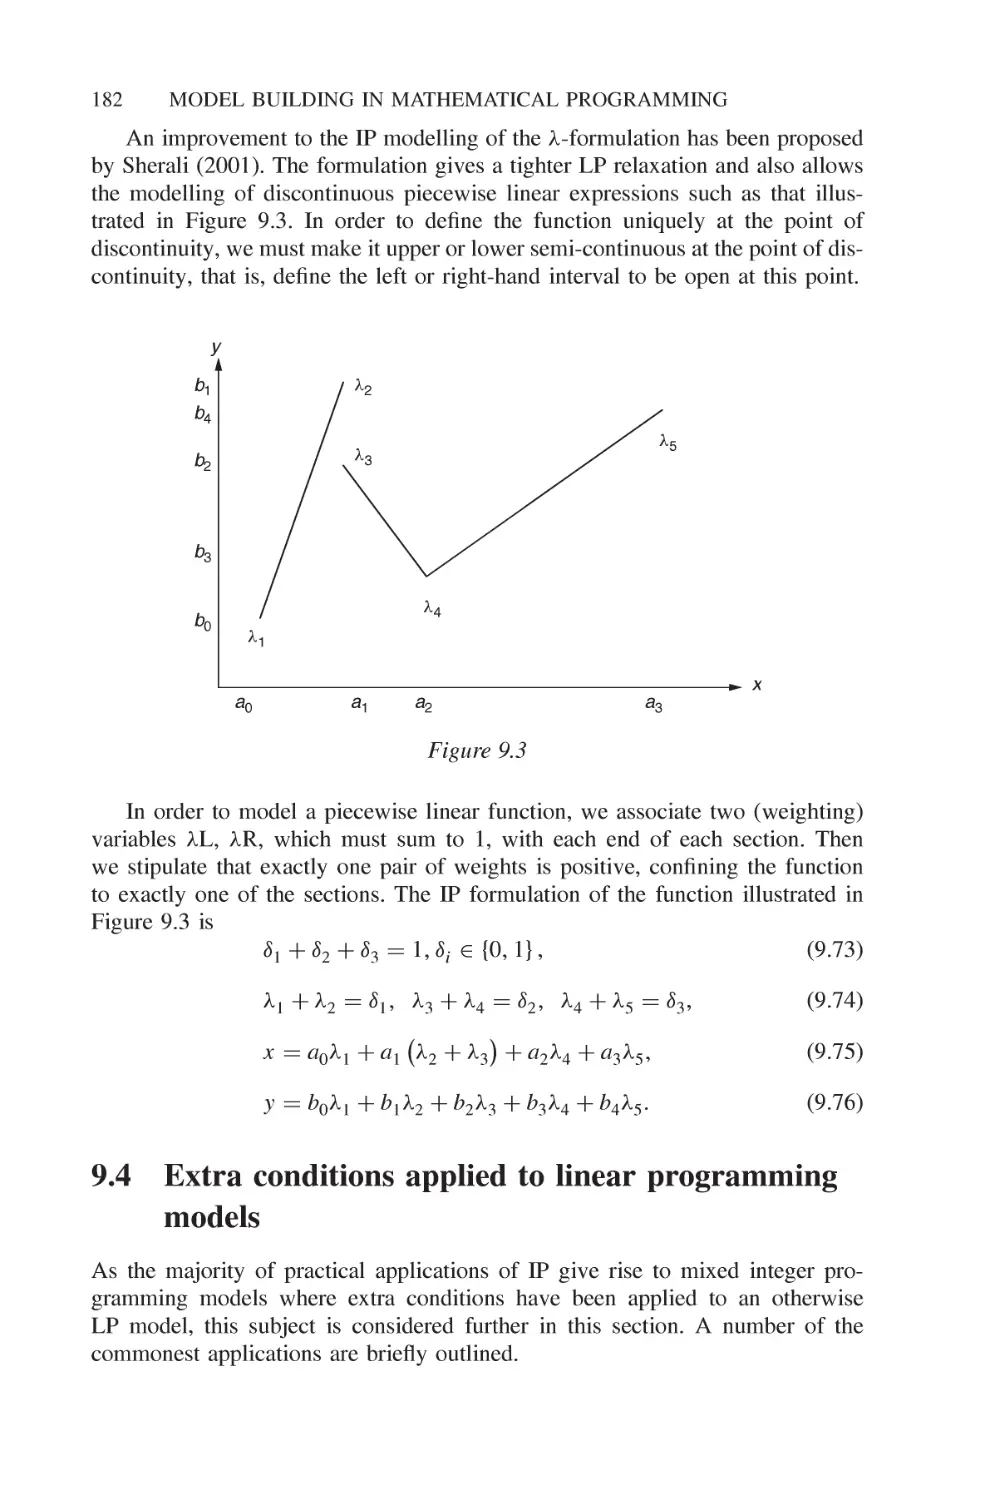 9.4 Extra conditions applied to linear programming models